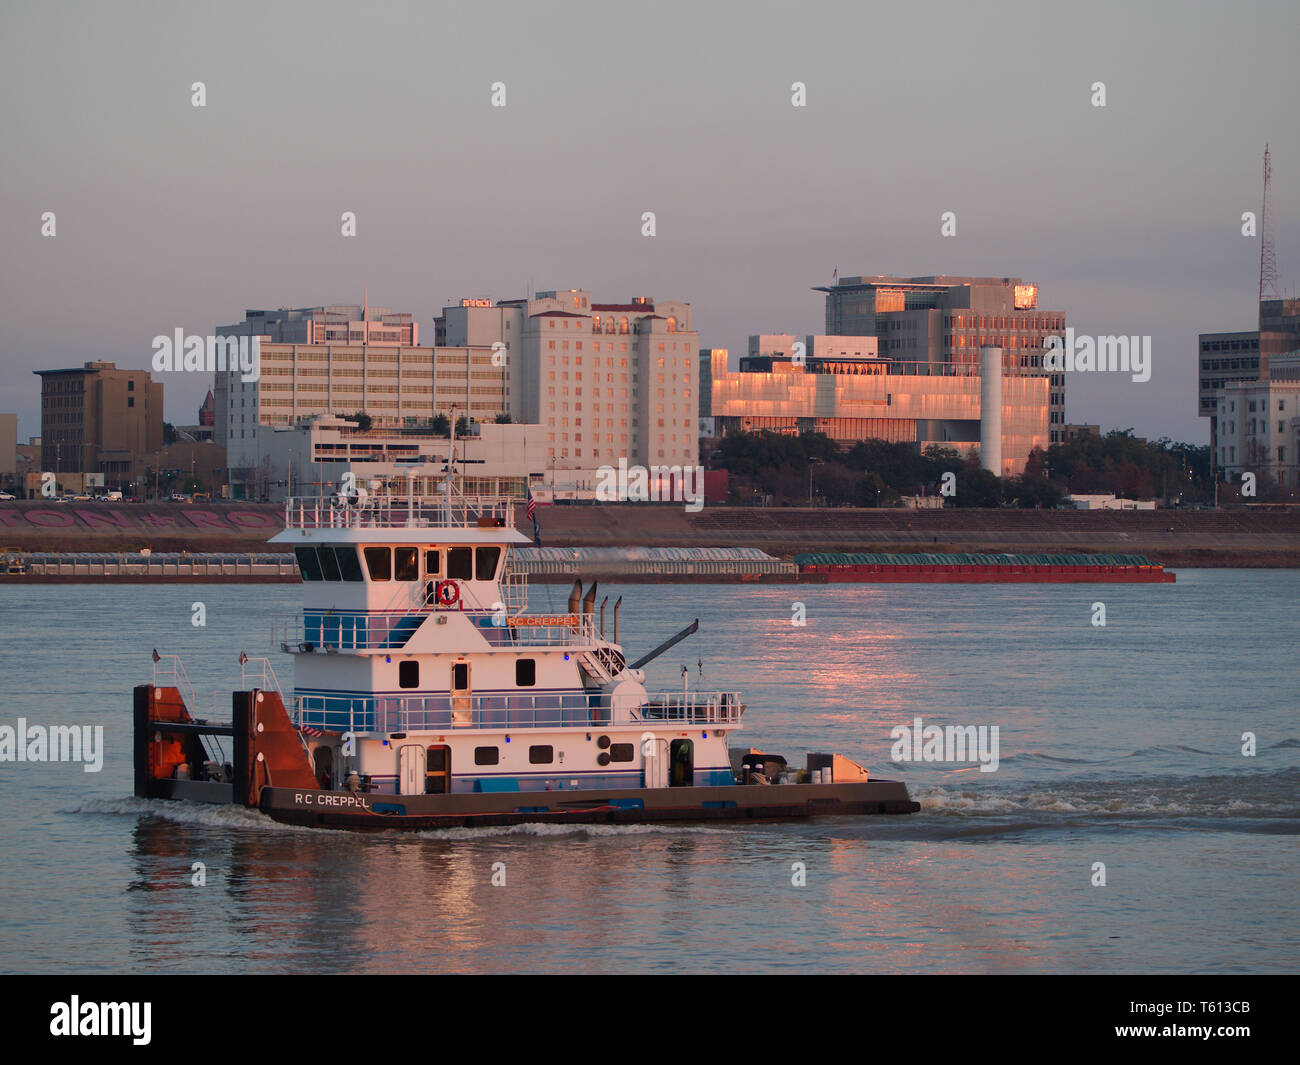 Port Allen, Louisiana, USA - 2019: Downtown Baton Rouge is seen from across the Mississippi River as a towboat travels upstream. Stock Photo